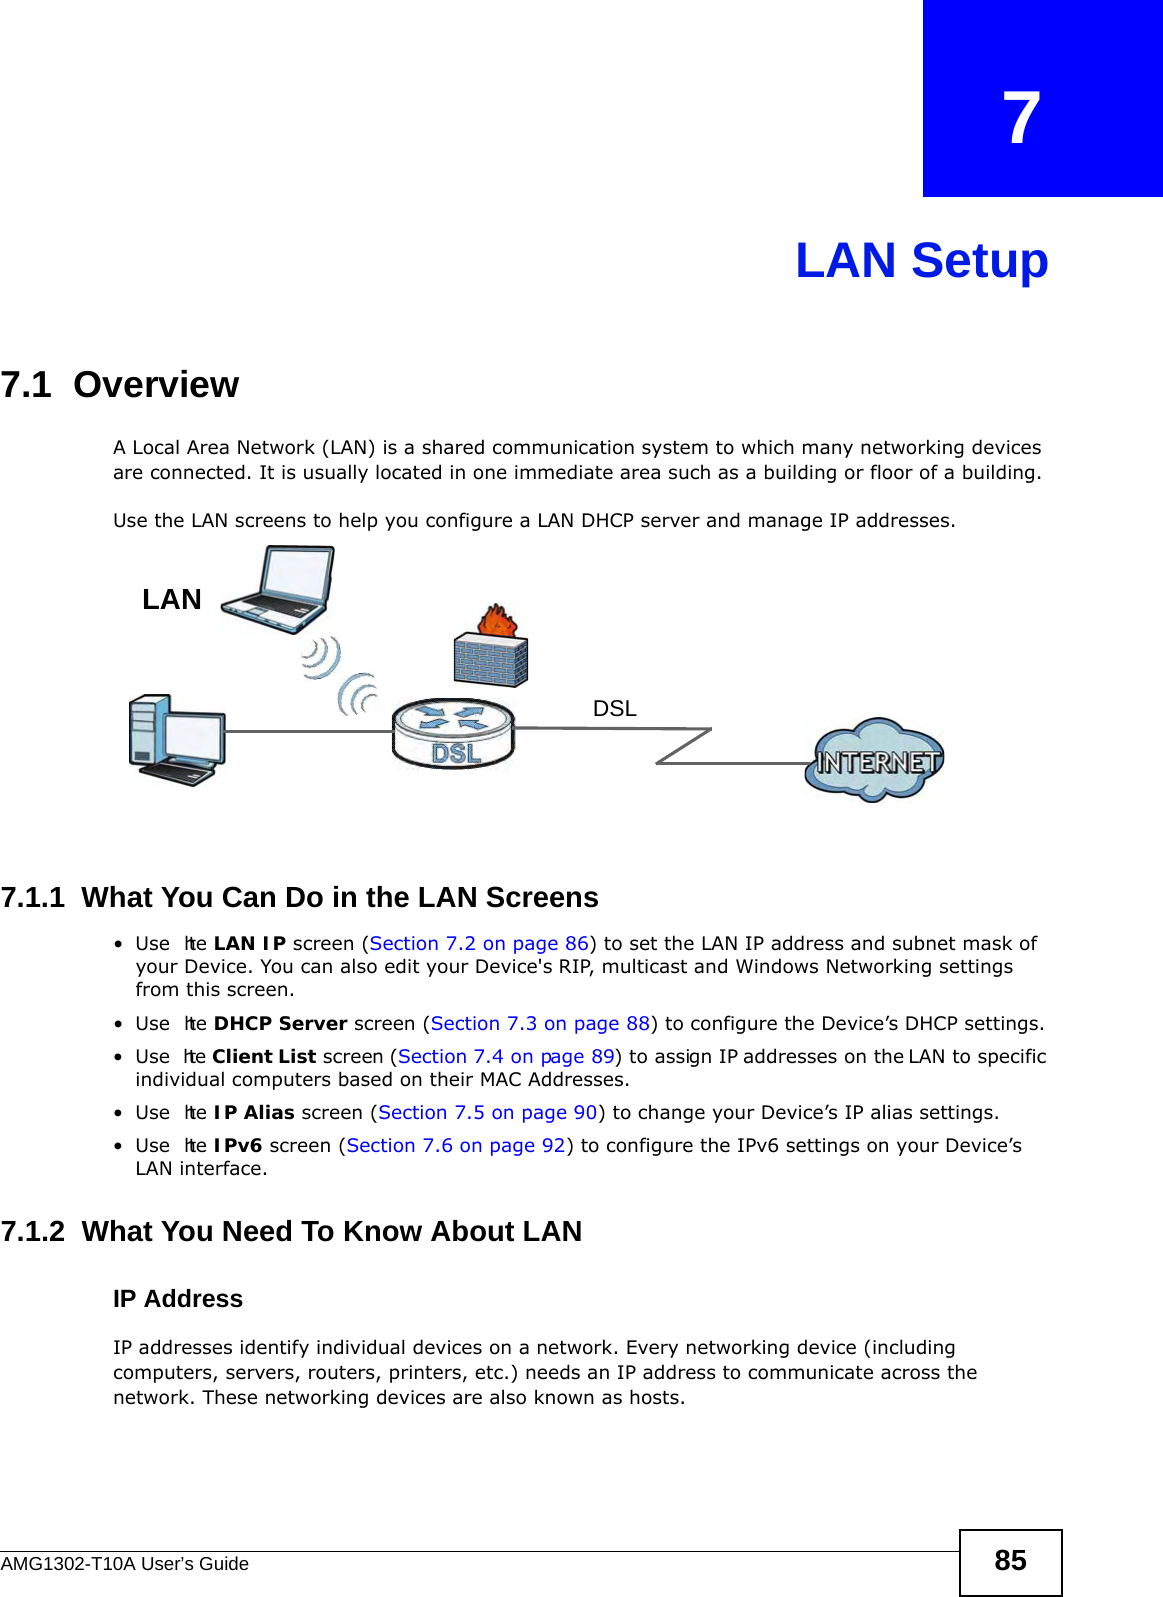 AMG1302-T10A User’s Guide 85CHAPTER   7LAN Setup7.1  OverviewA Local Area Network (LAN) is a shared communication system to which many networking devices are connected. It is usually located in one immediate area such as a building or floor of a building.Use the LAN screens to help you configure a LAN DHCP server and manage IP addresses.7.1.1  What You Can Do in the LAN Screens•Use  the LAN IP screen (Section 7.2 on page 86) to set the LAN IP address and subnet mask of your Device. You can also edit your Device&apos;s RIP, multicast and Windows Networking settings from this screen.•Use  the DHCP Server screen (Section 7.3 on page 88) to configure the Device’s DHCP settings.•Use  the Client List screen (Section 7.4 on page 89) to assign IP addresses on the LAN to specific individual computers based on their MAC Addresses. •Use  the IP Alias screen (Section 7.5 on page 90) to change your Device’s IP alias settings.•Use  the IPv6 screen (Section 7.6 on page 92) to configure the IPv6 settings on your Device’s LAN interface.7.1.2  What You Need To Know About LANIP AddressIP addresses identify individual devices on a network. Every networking device (including computers, servers, routers, printers, etc.) needs an IP address to communicate across the network. These networking devices are also known as hosts.DSLLAN